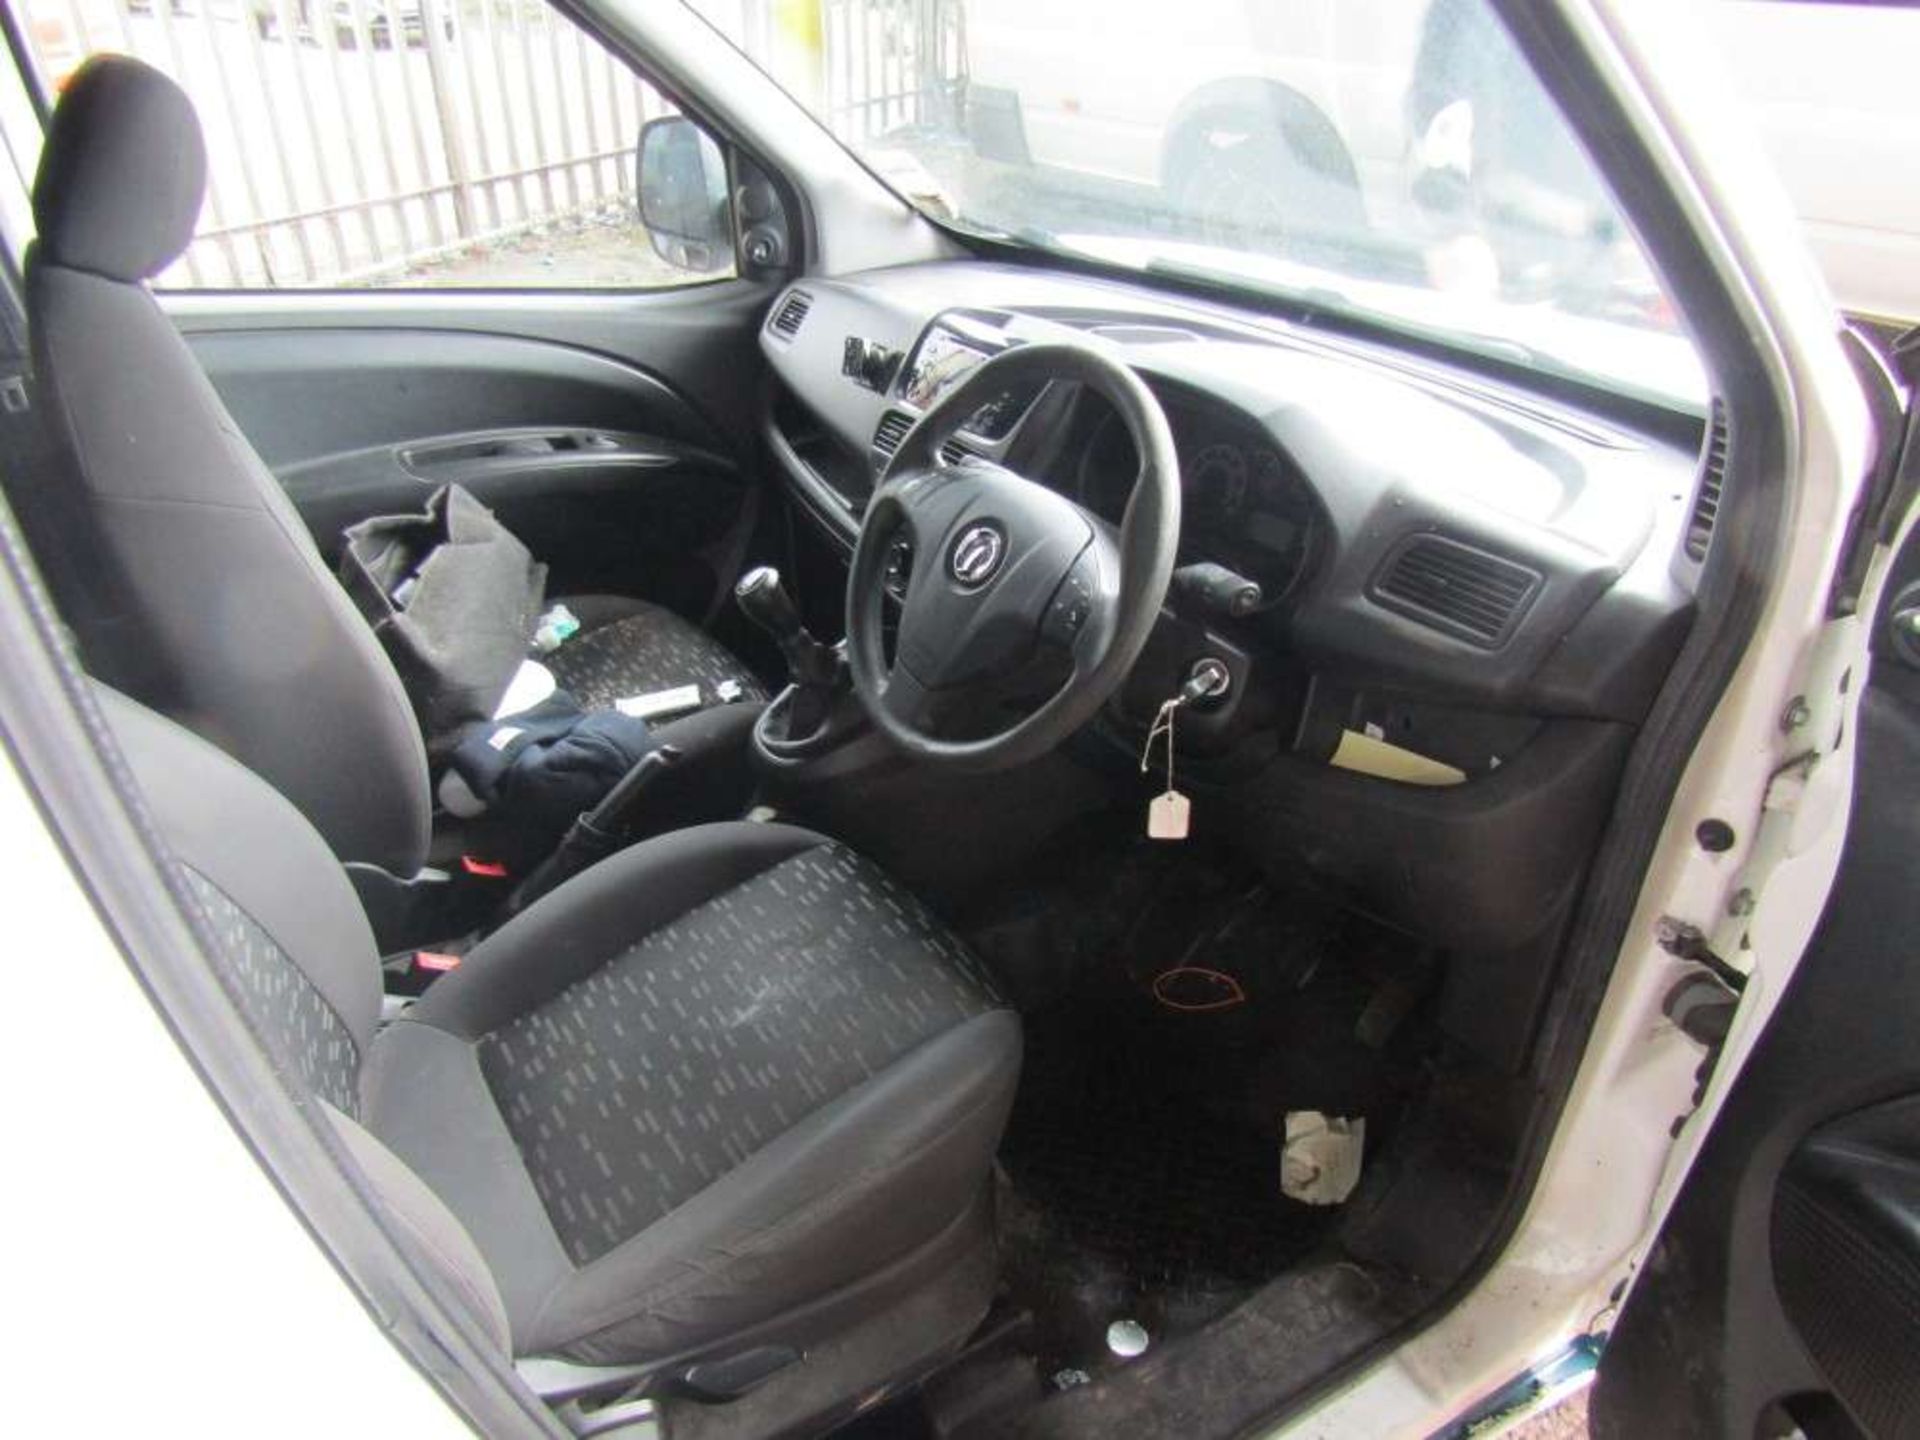 2014 63 reg Vauxhall Combo 2300 L1H1 CDTI (Non Runner) (Direct United Utilities Water) - Image 6 of 7